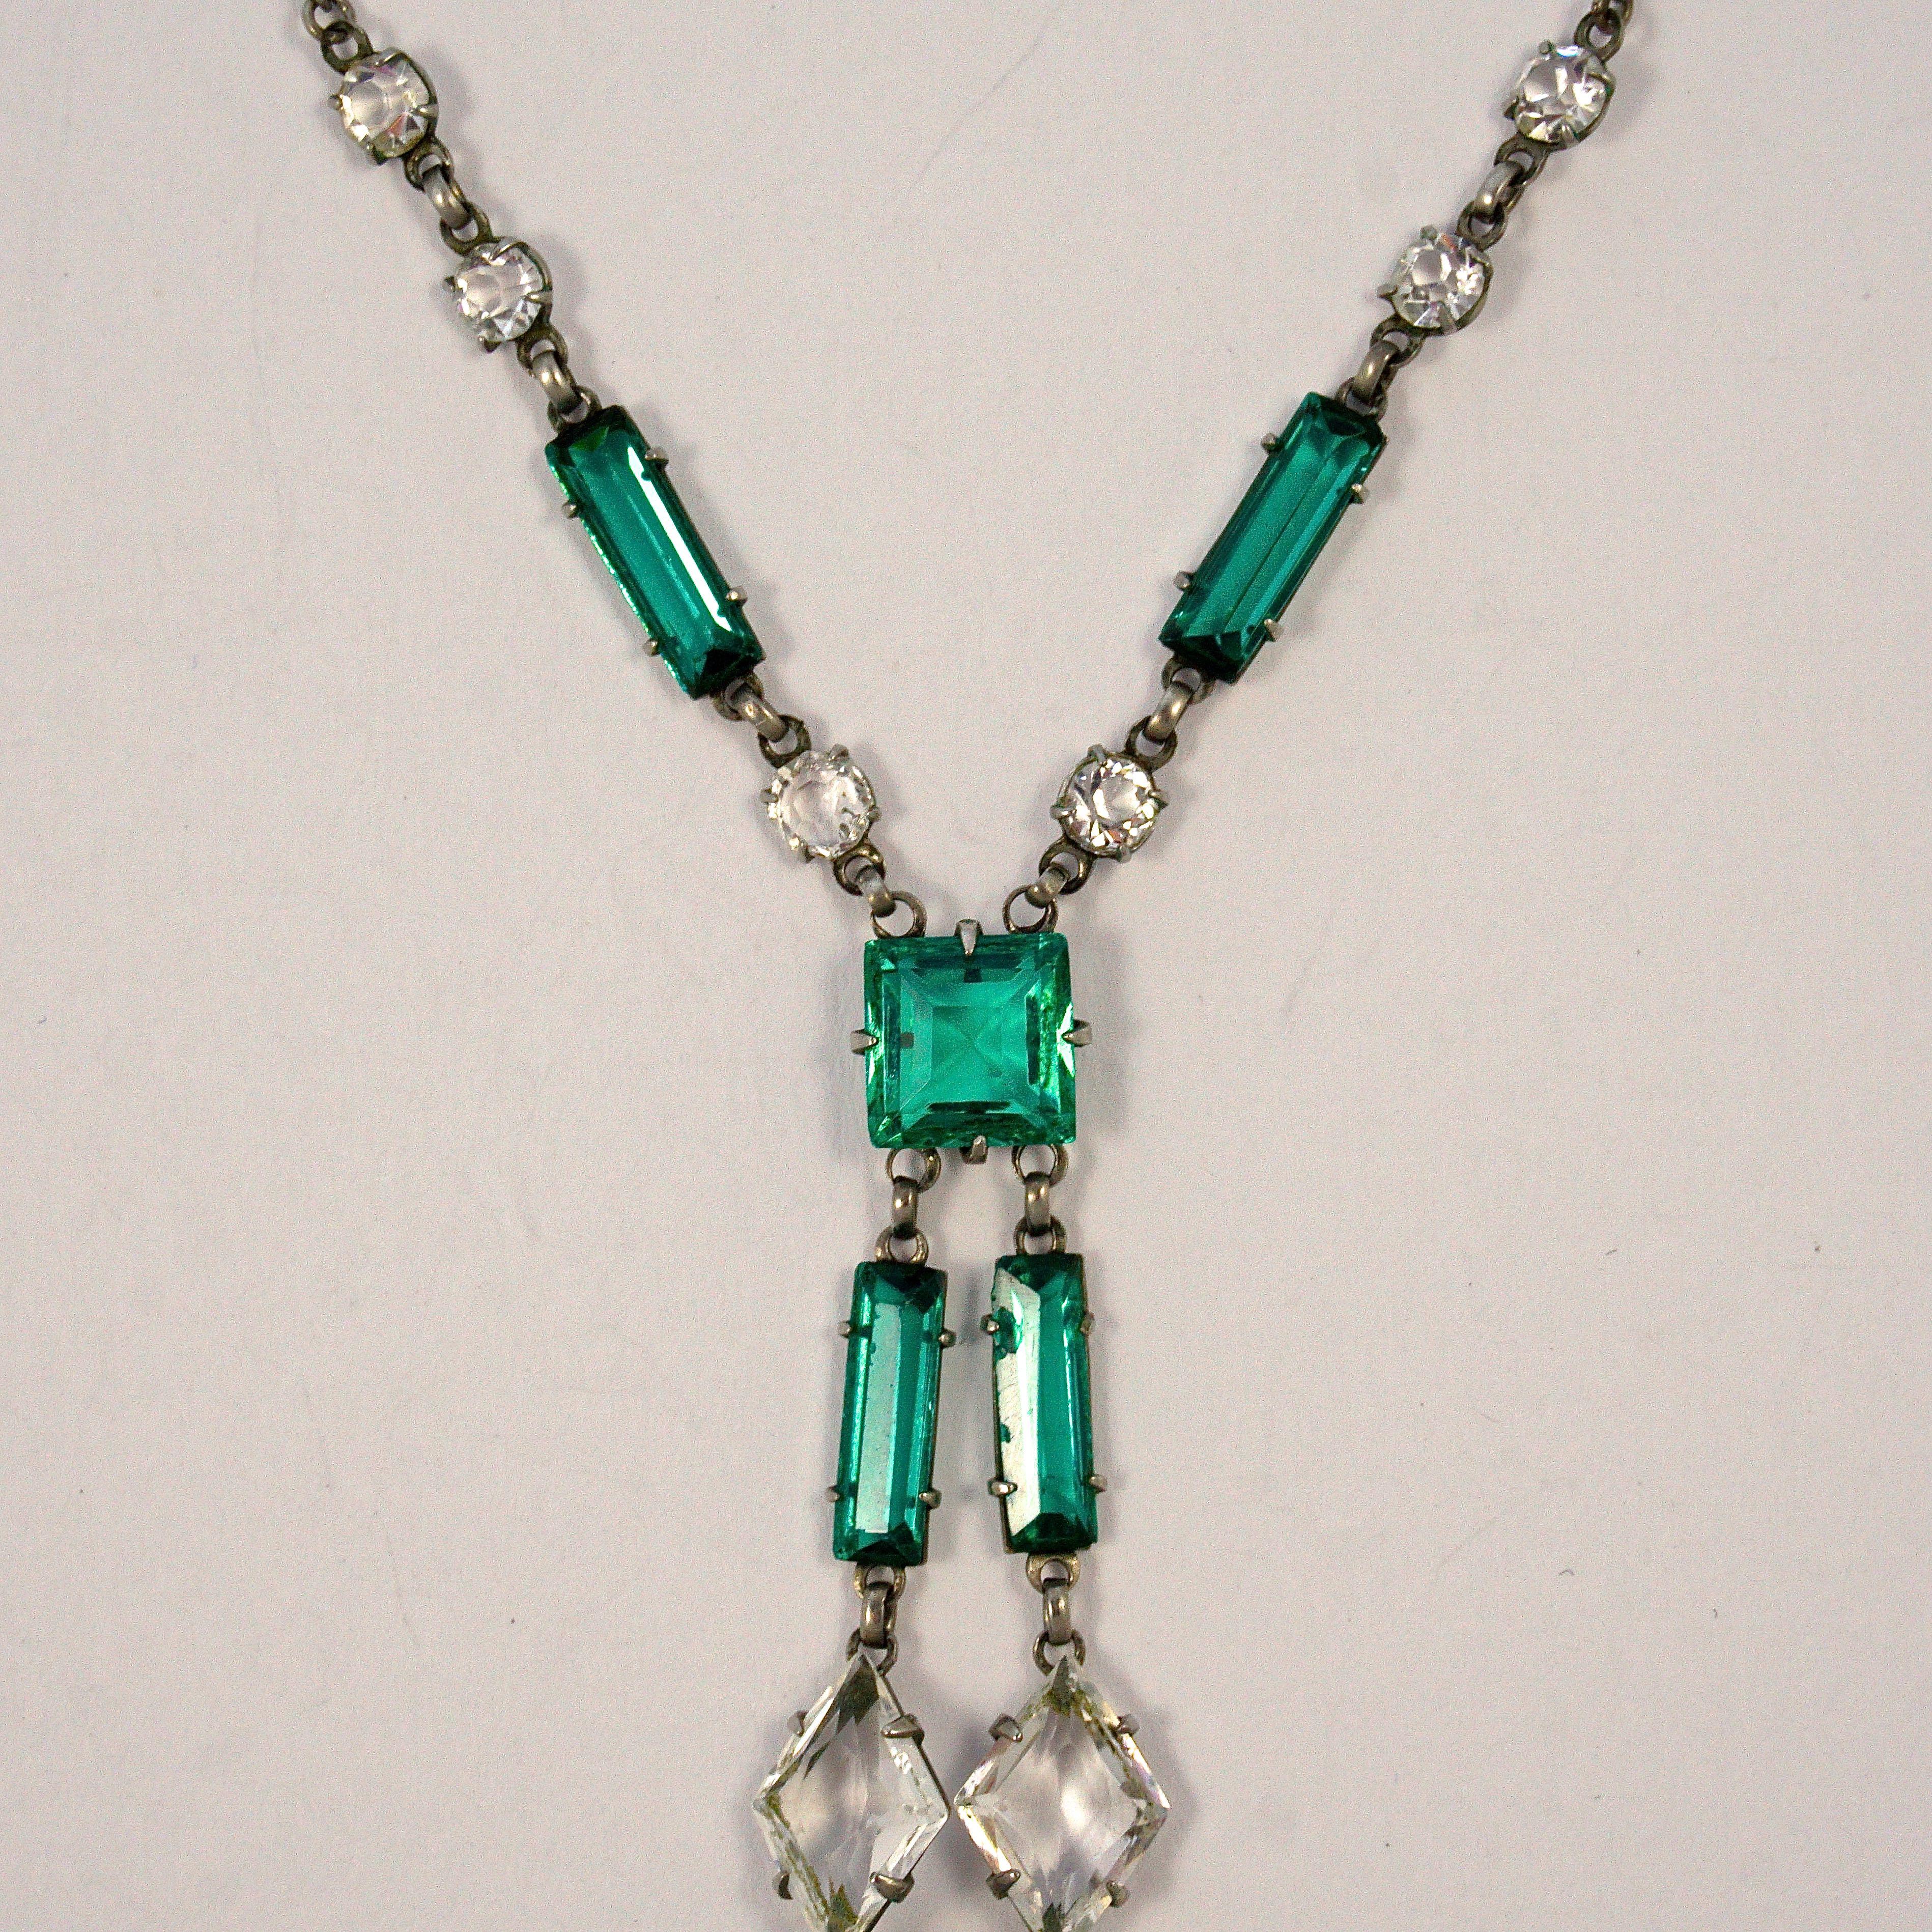 Art Deco Platinon bar and link chain necklace, featuring a very beautiful drop pendant with sea green and clear crystals. The faceted crystals are raised at the front and pointed at the back, for maximum sparkle. Length 41.7cm / 16.4 inches, and the